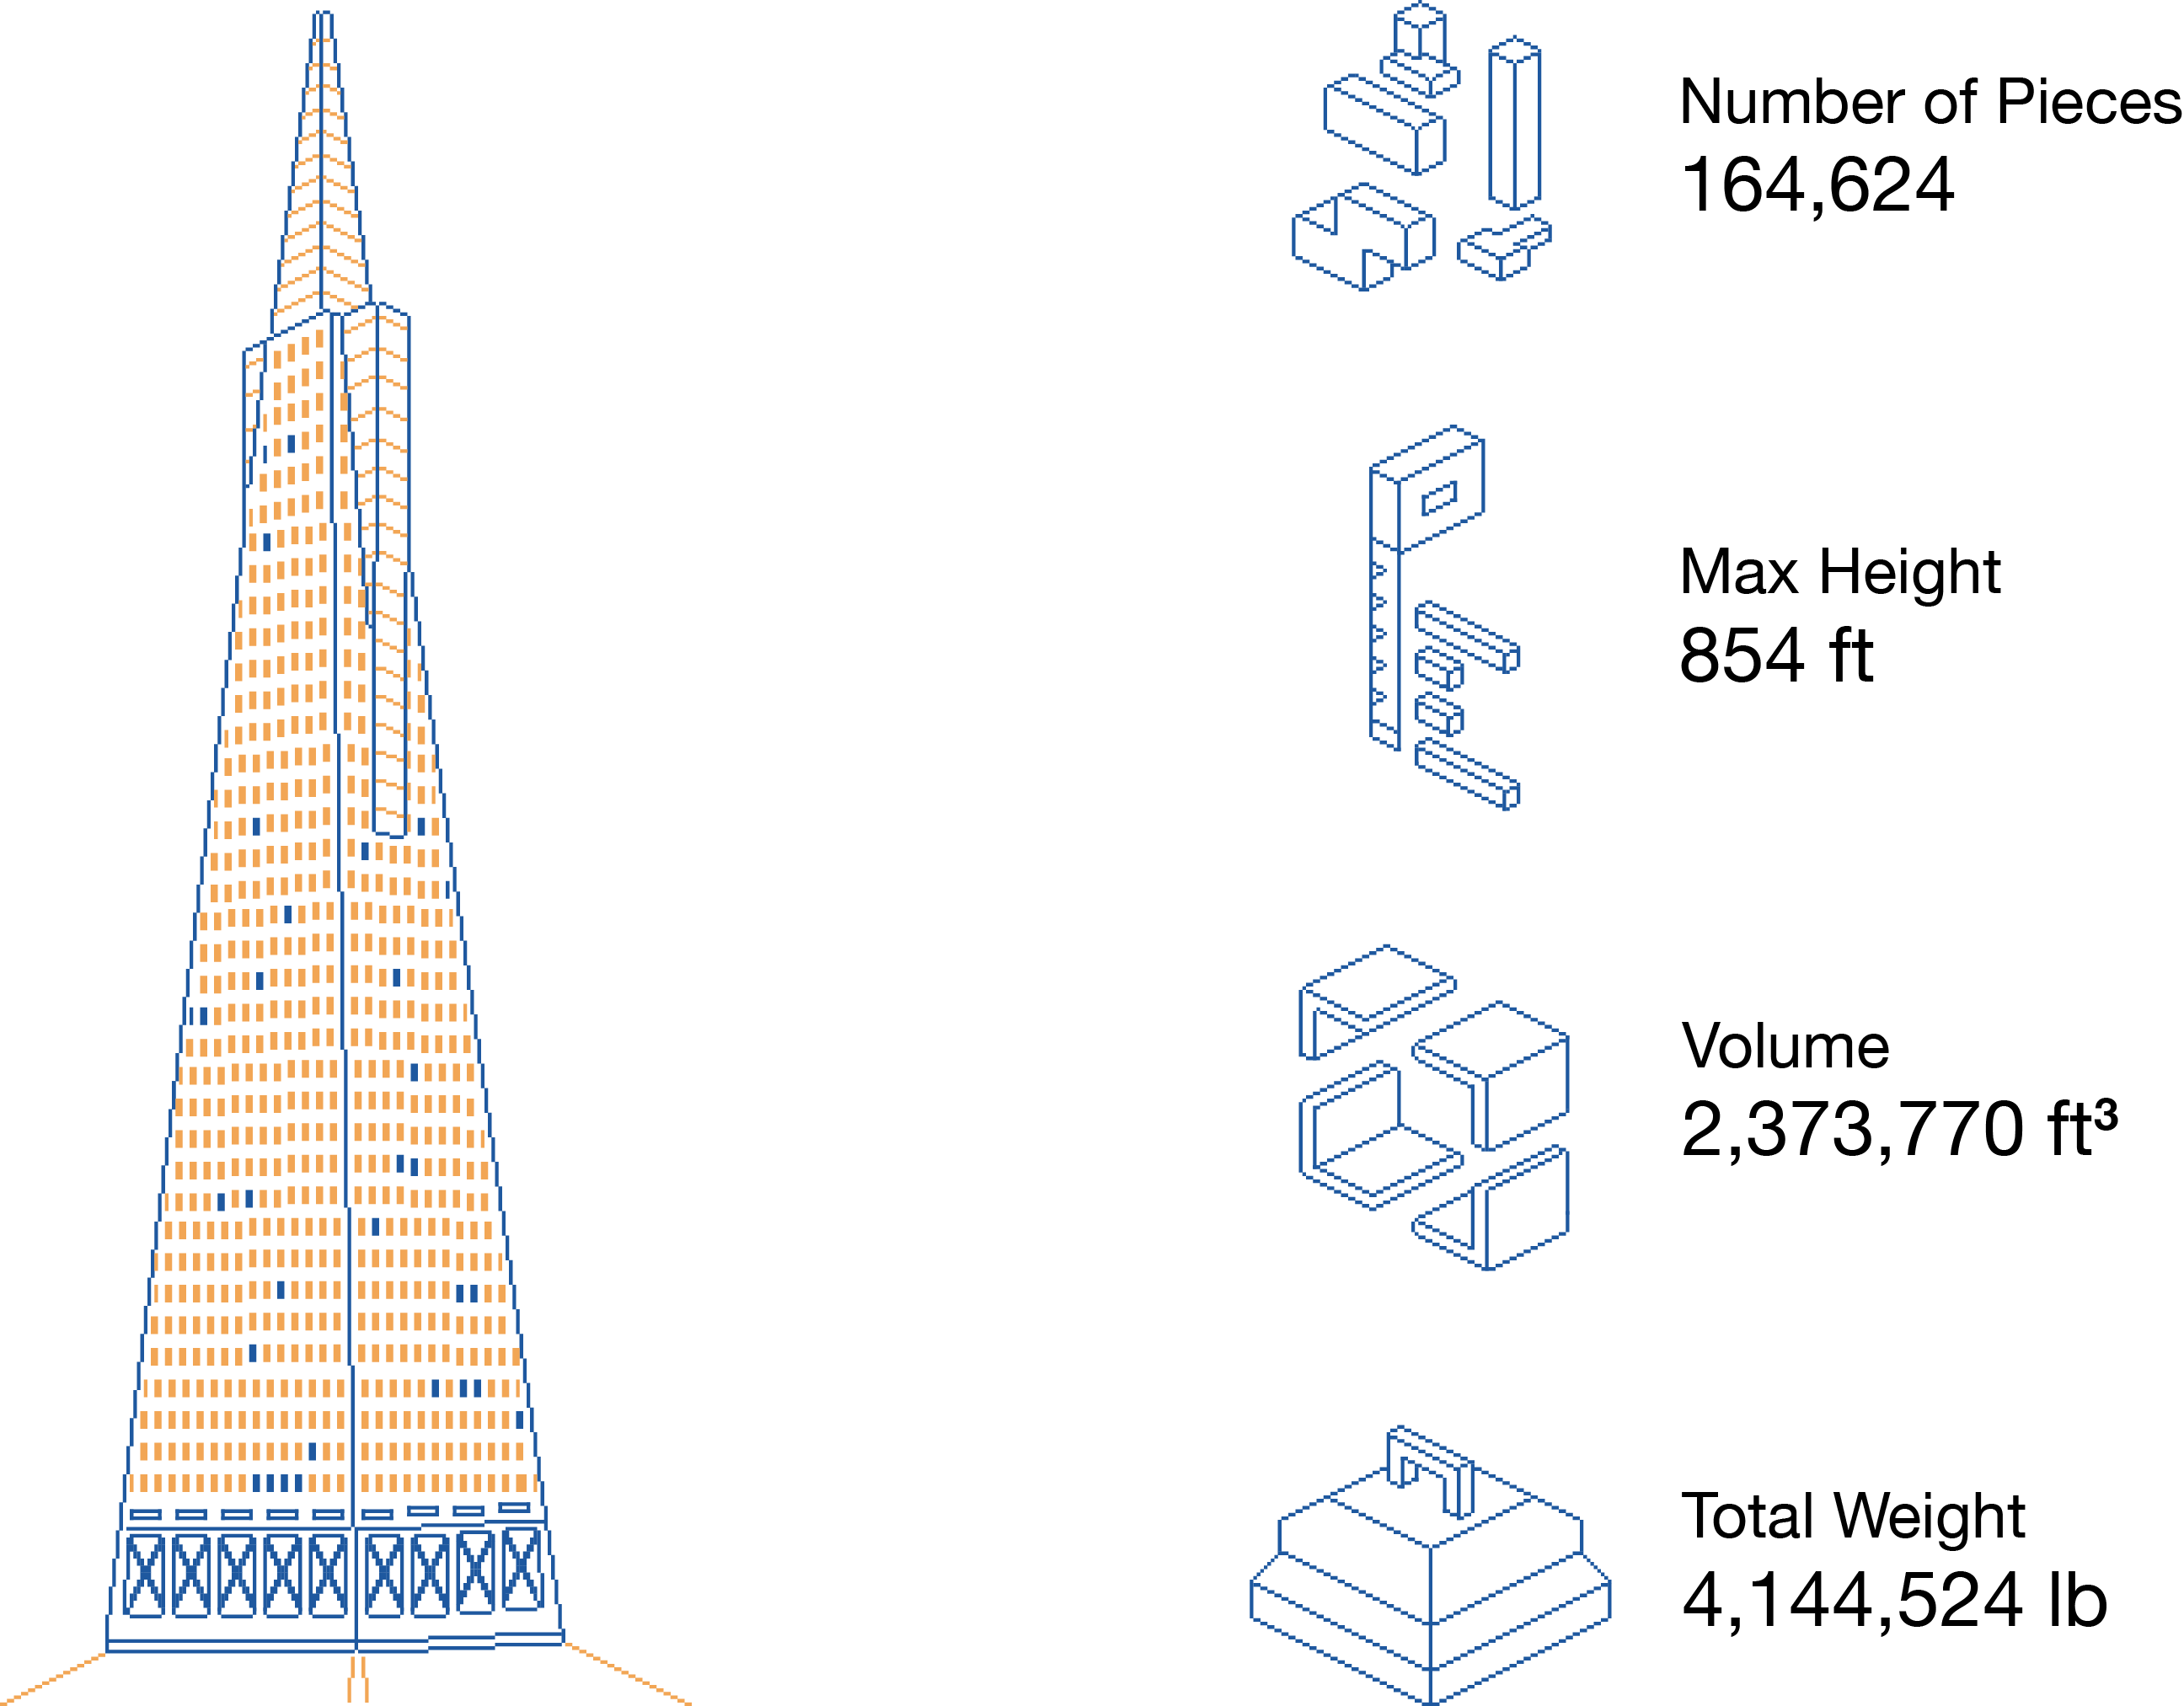 Estimated scaffolding requirement for the Transamerica Pyramid.